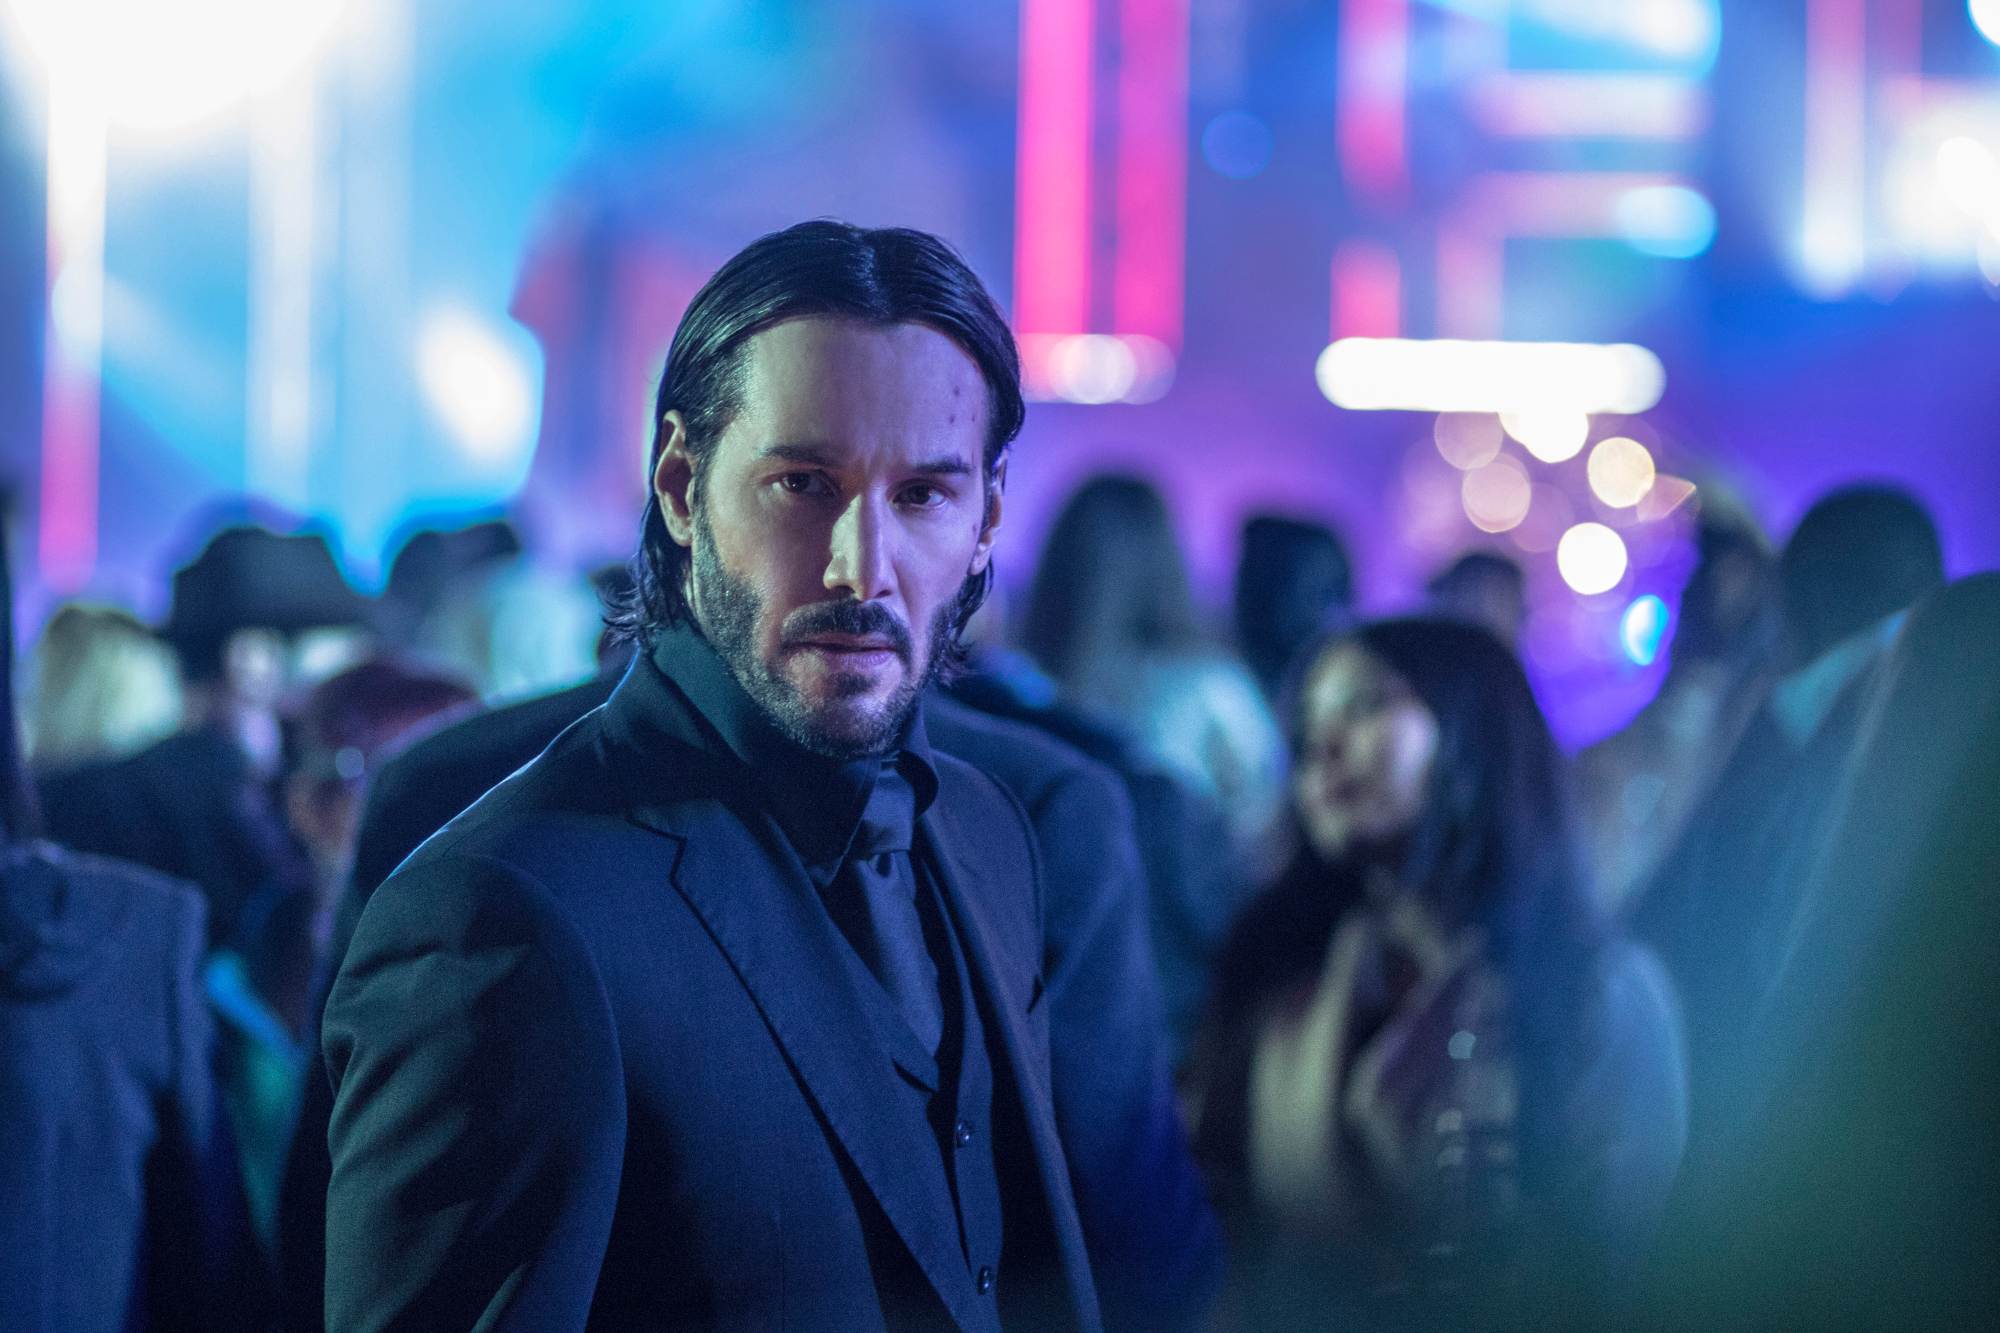 'John Wick_ Chapter 2' Keanu Reeves as John Wick standing in an all black suit in a crowd of people.